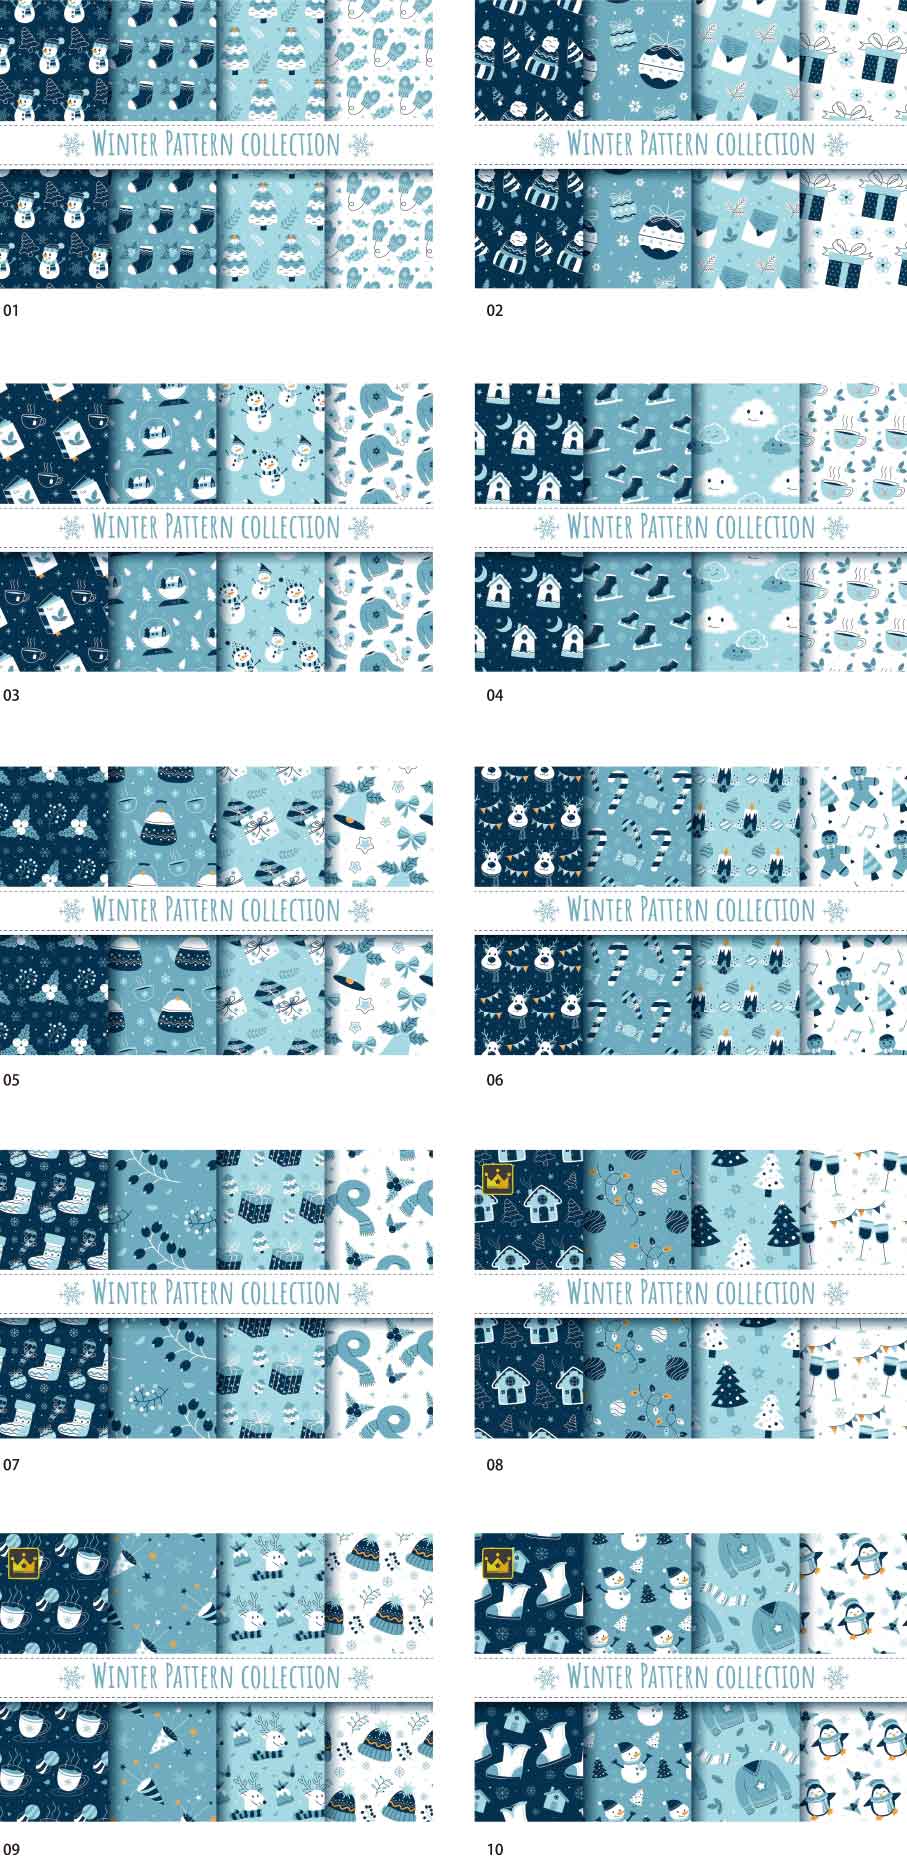 Winter pattern illustration collection